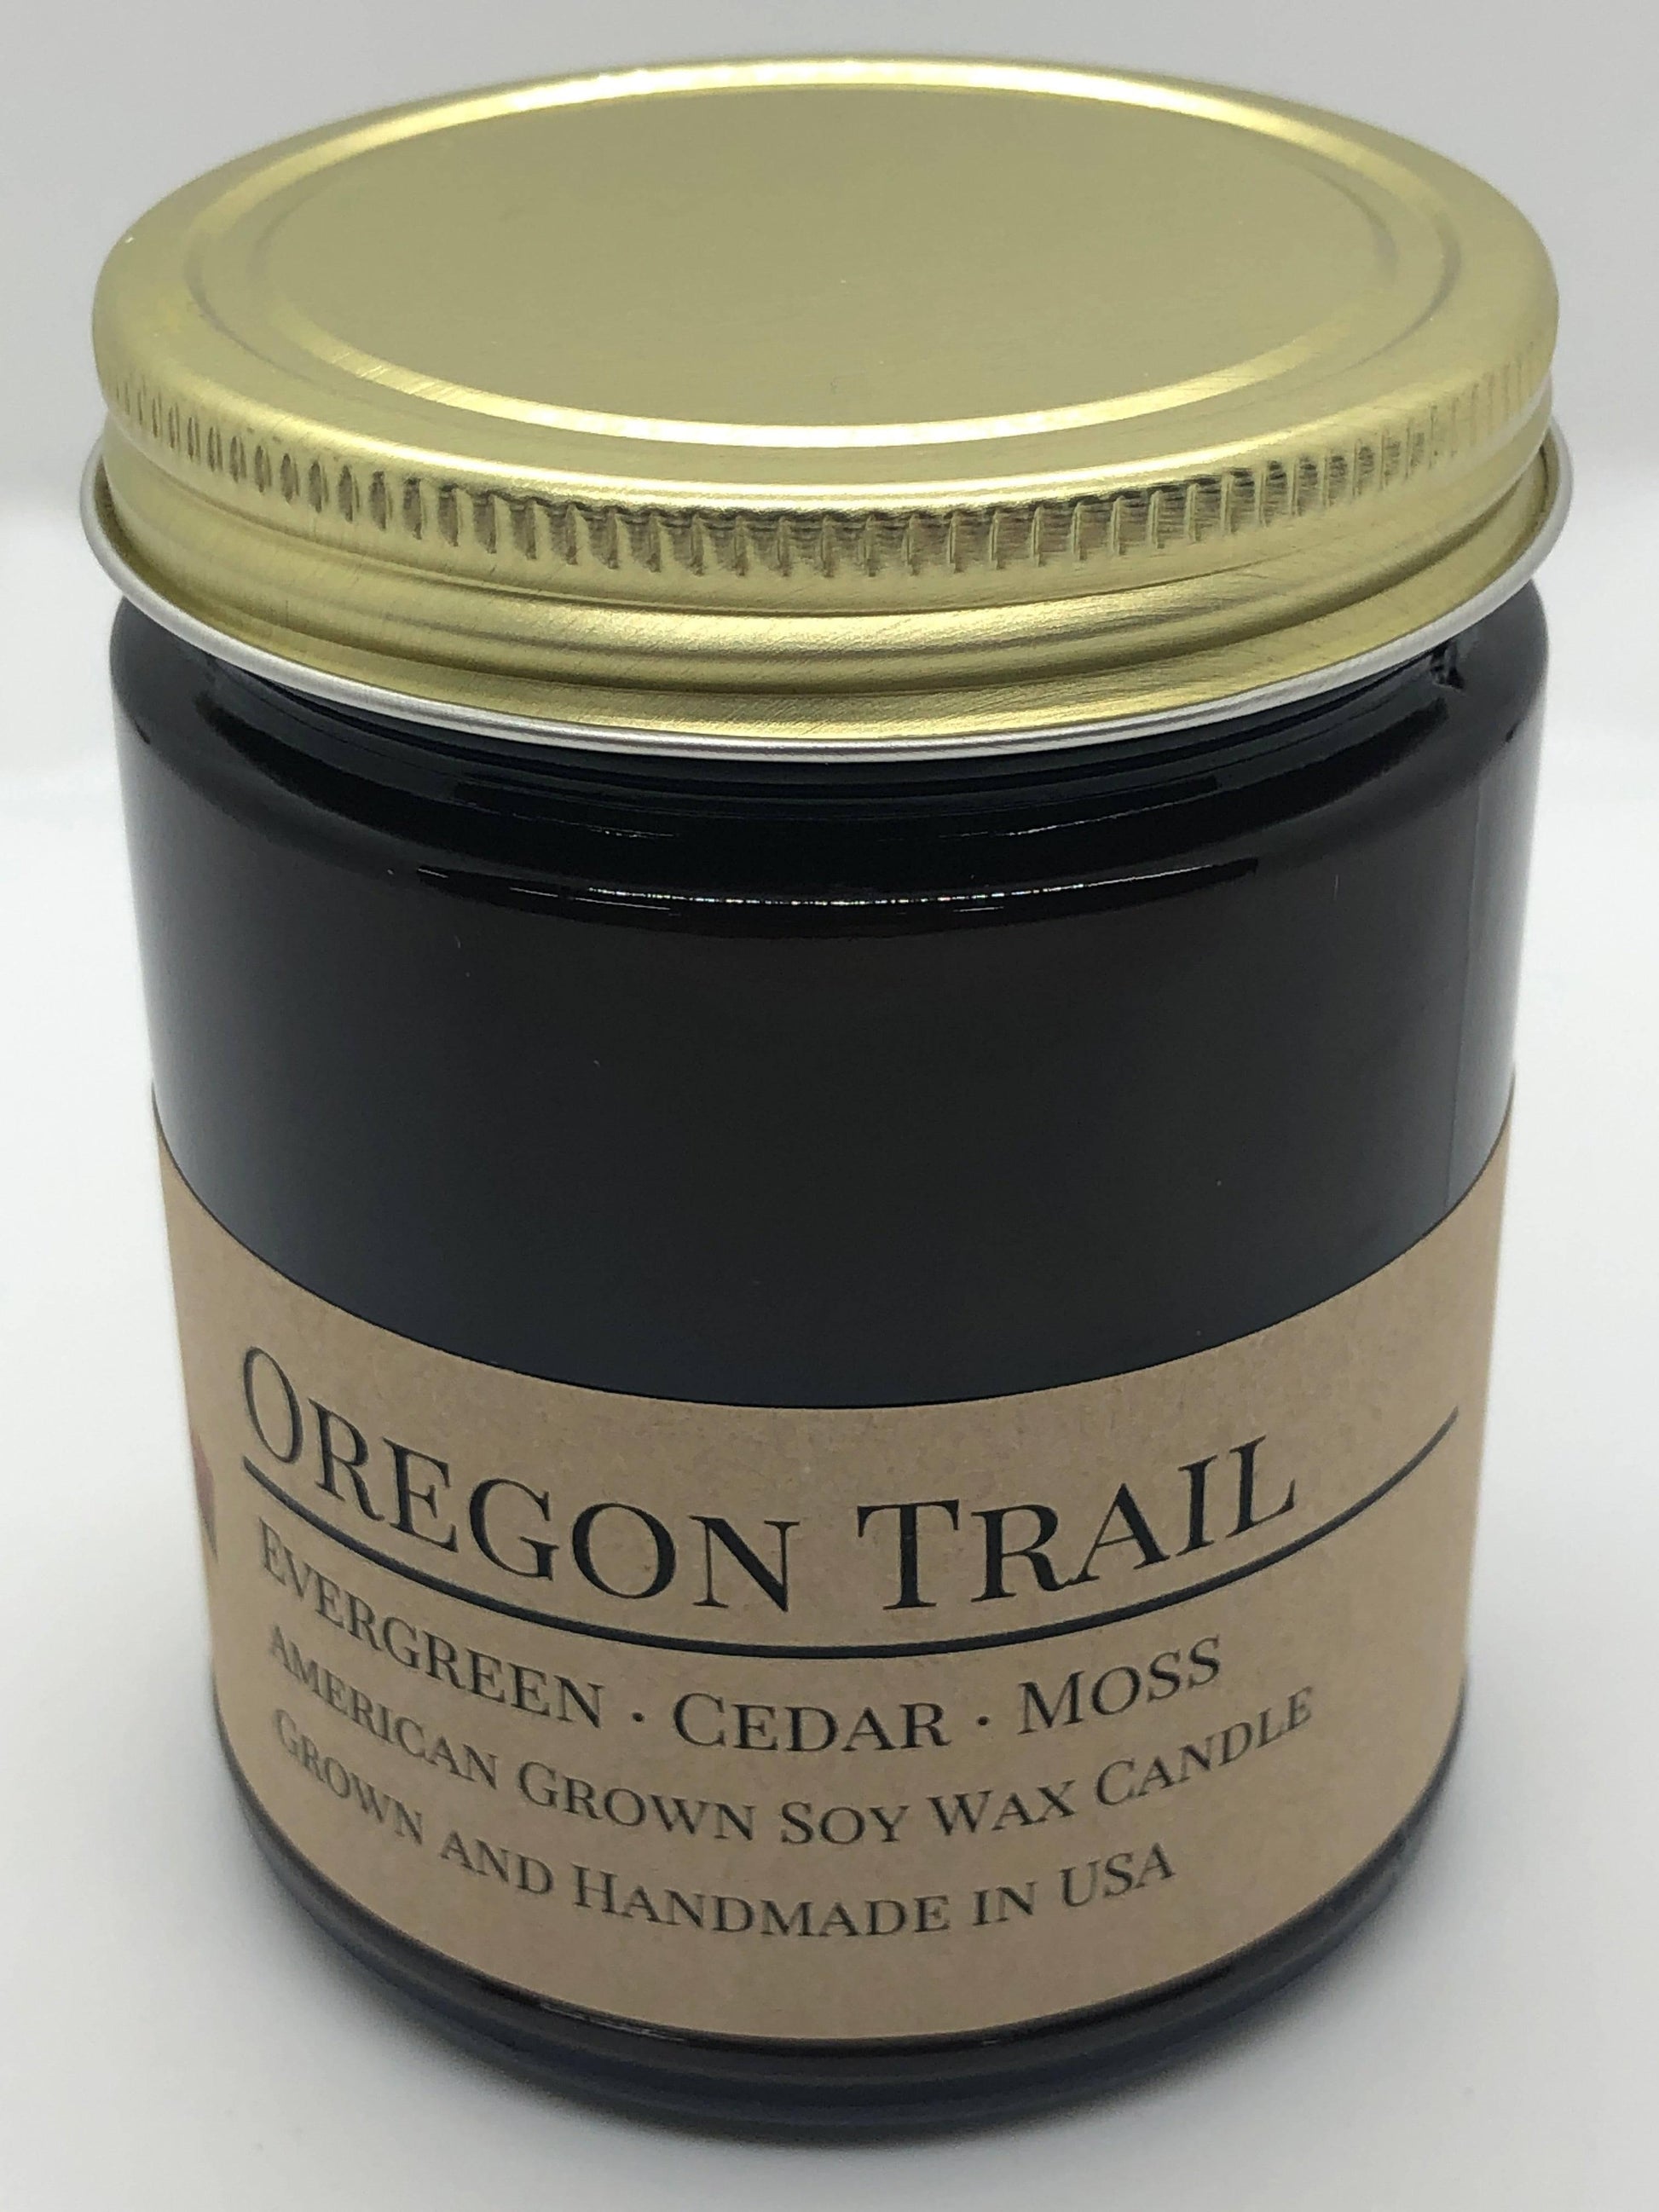 Oregon Trail Soy Wax Candle | 9 oz Amber Apothecary Jar - Prairie Fire Candles